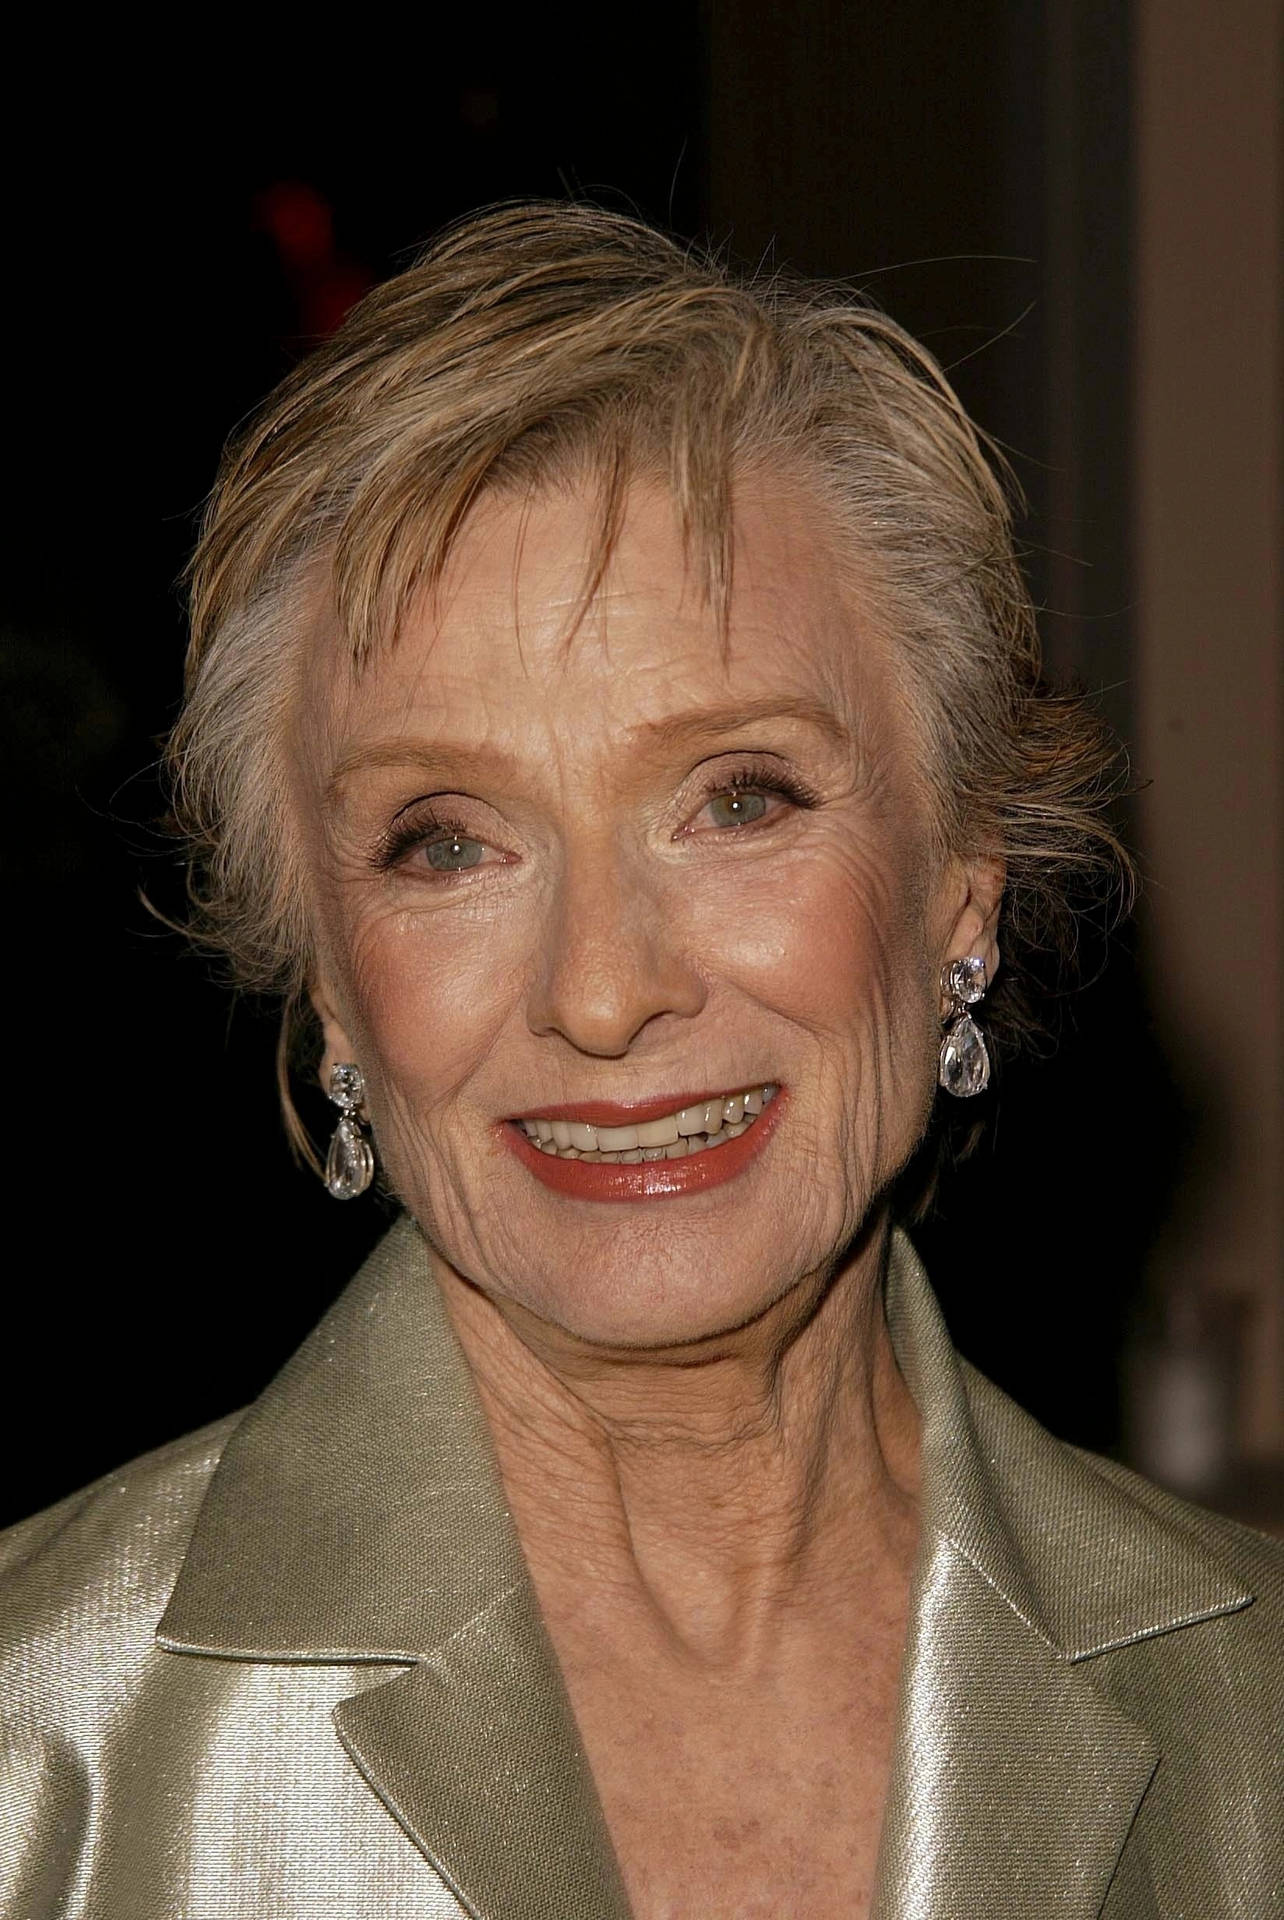 Cloris Leachman Iconic Actress And Comedian Wallpaper